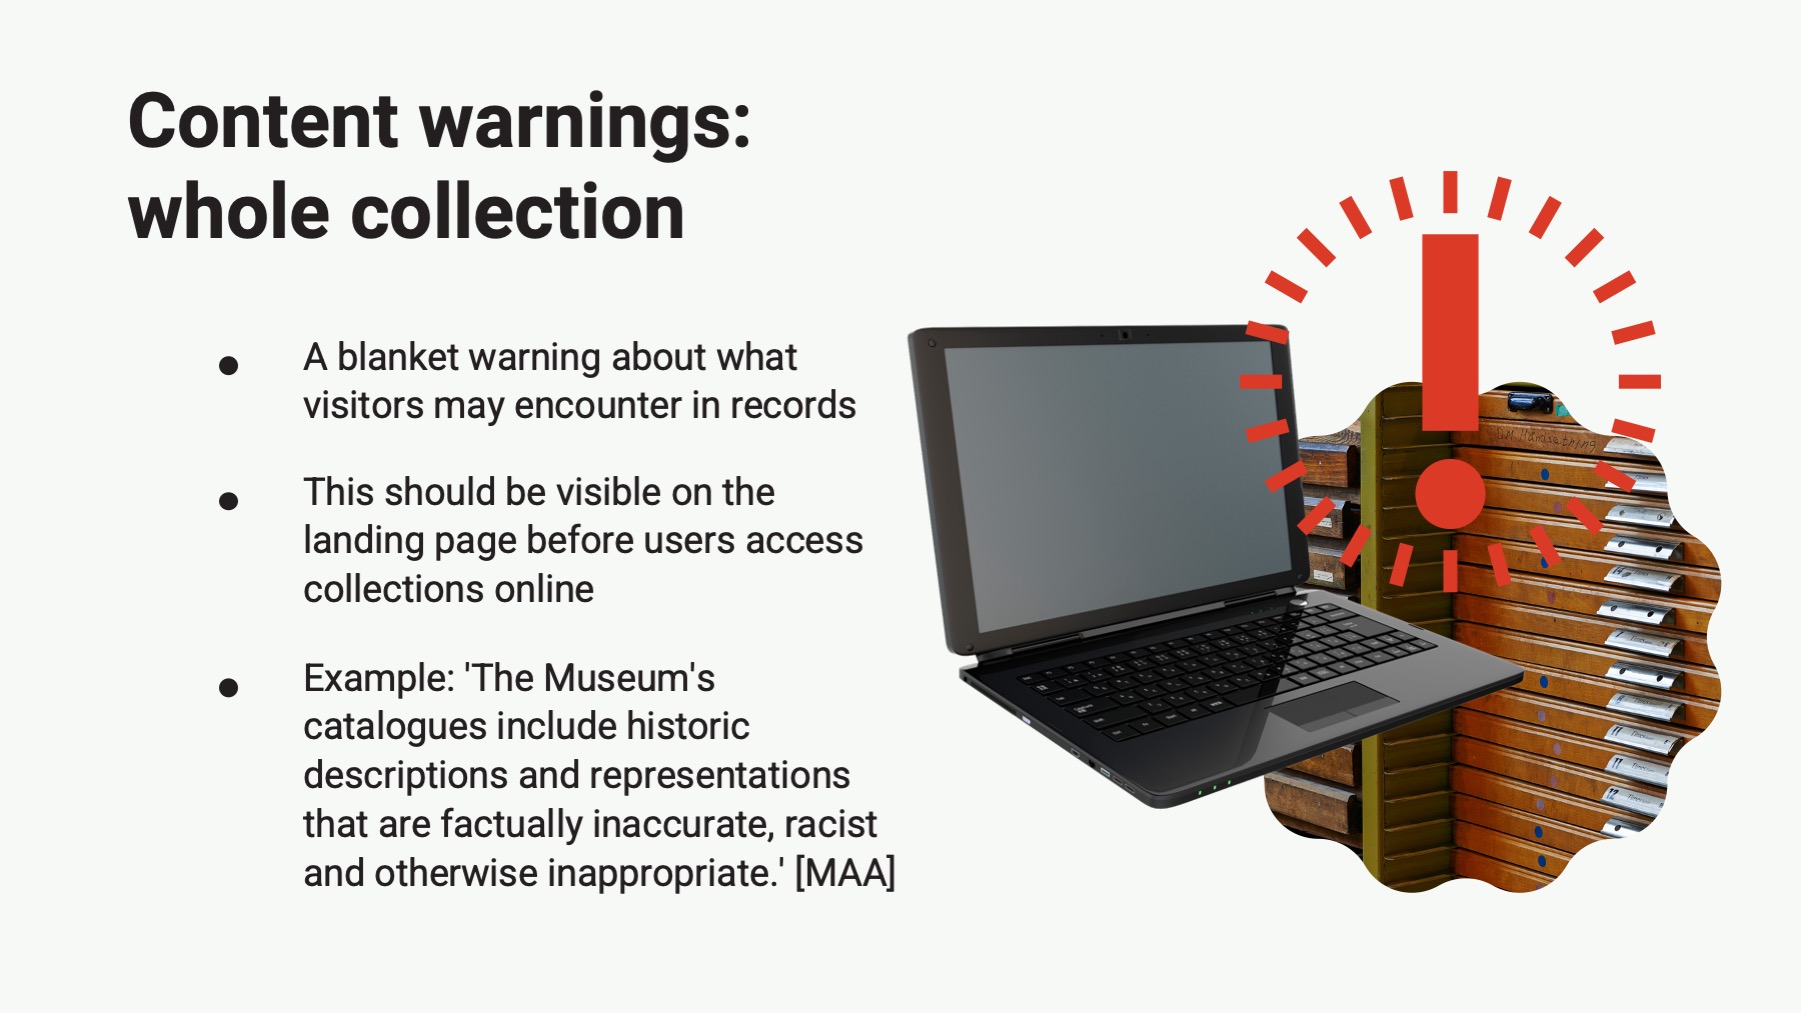 Powerpoint slide with the text: Content warnings: whole collection A blanket warning about what visitors may encounter in records This should be visible on the landing page before users access collections online Example: 'The Museum's catalogues include historic descriptions and representations that are factually inaccurate, racist and otherwise inappropriate.' [MAA]